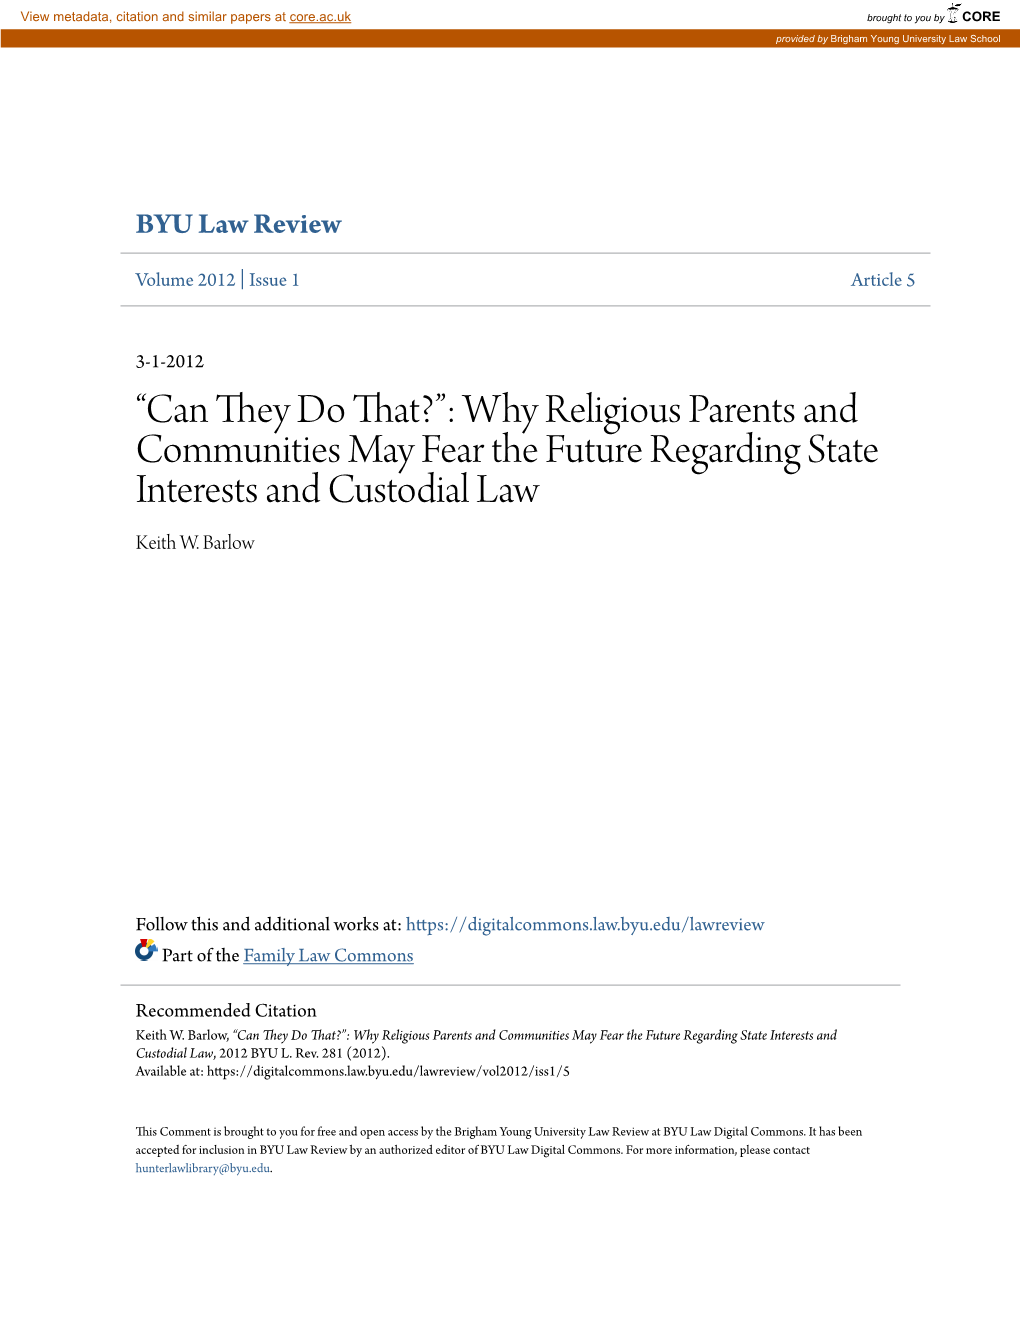 Why Religious Parents and Communities May Fear the Future Regarding State Interests and Custodial Law Keith W